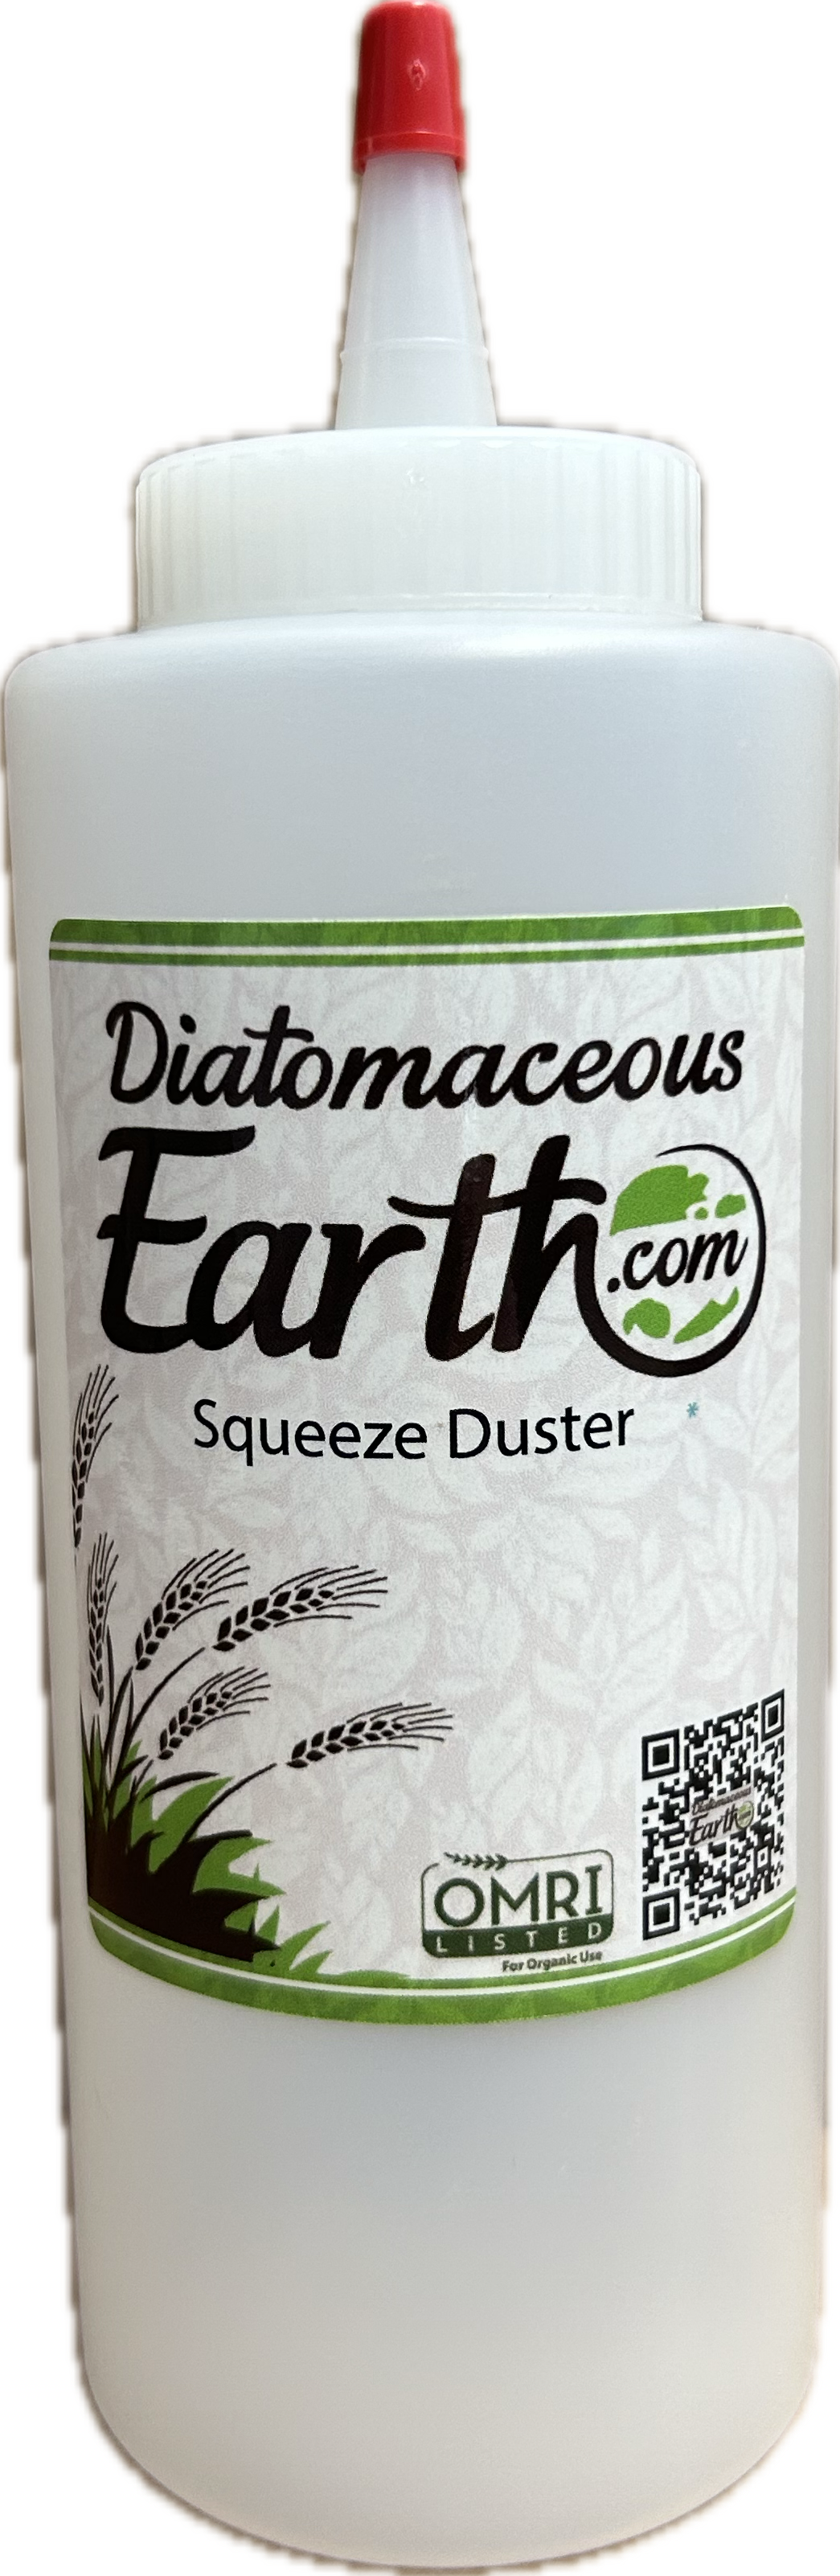 Refillable Diatomaceous Earth Squeeze Duster Applicator